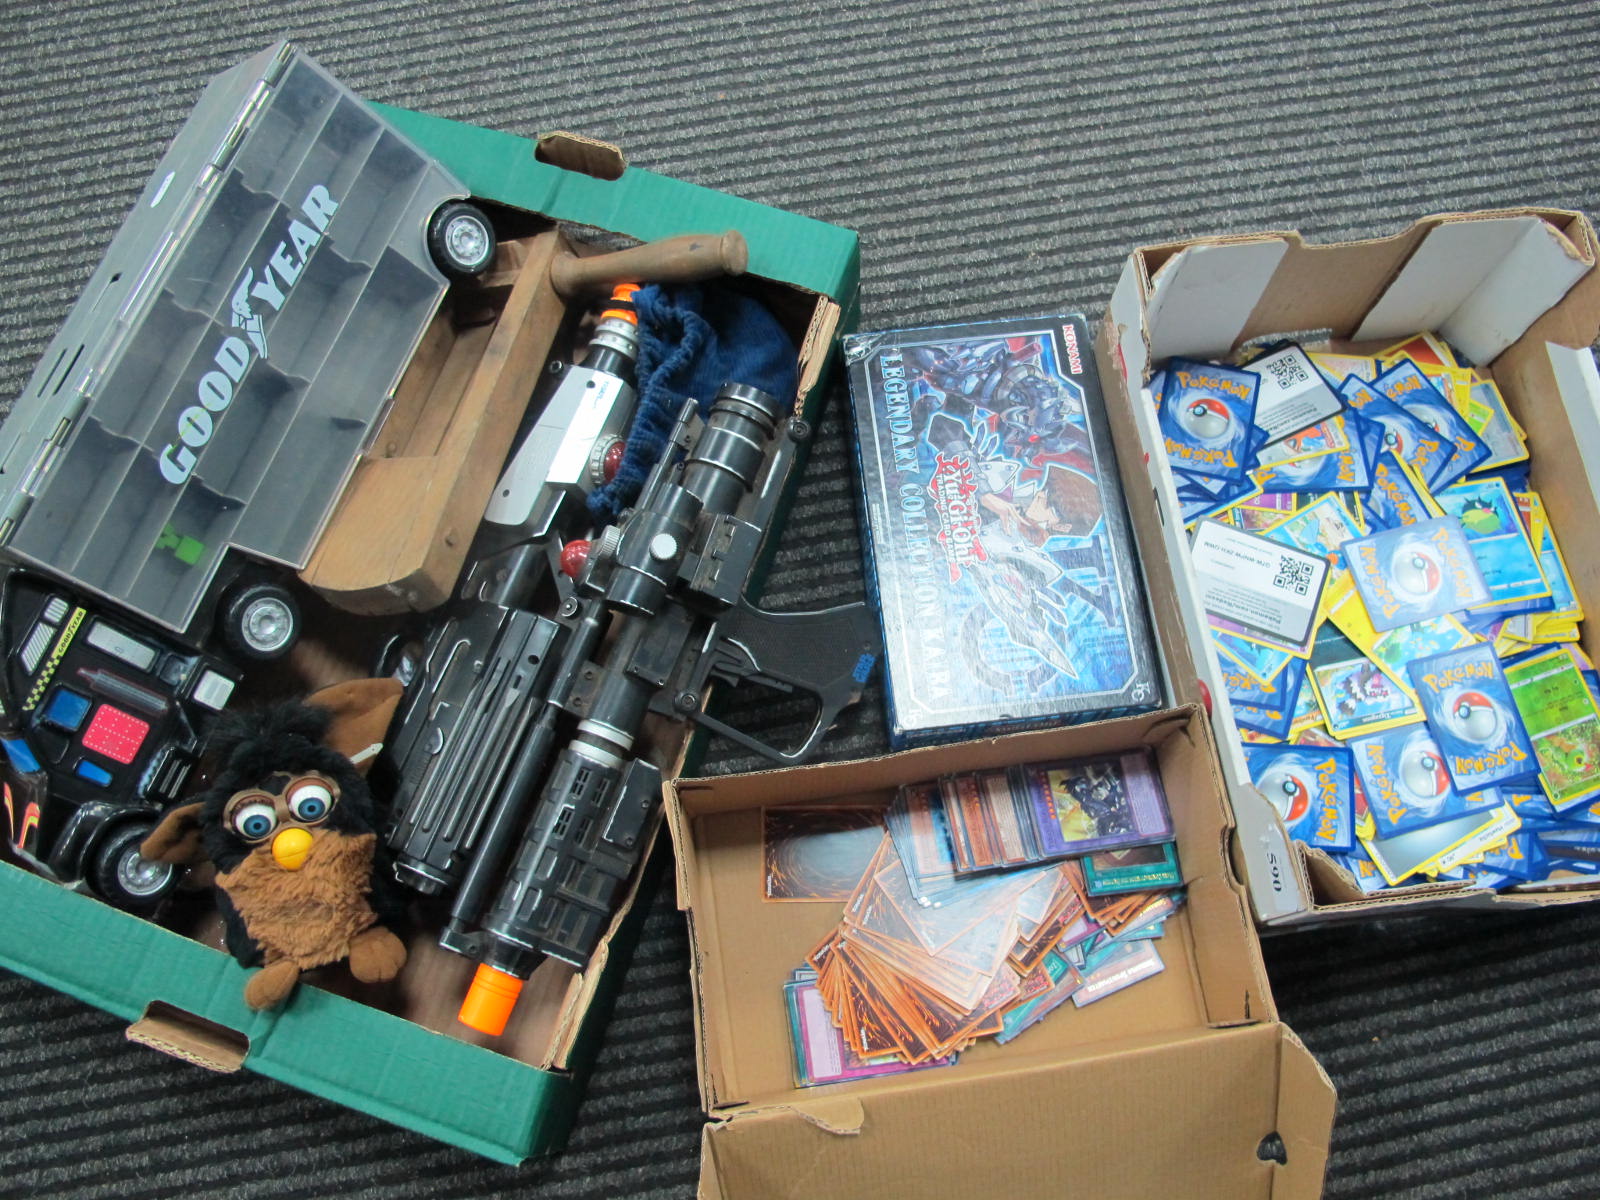 Pokemon Trade Cards, Star Wars Guns, marbles, wooden rattle, etc:- Two Boxes.